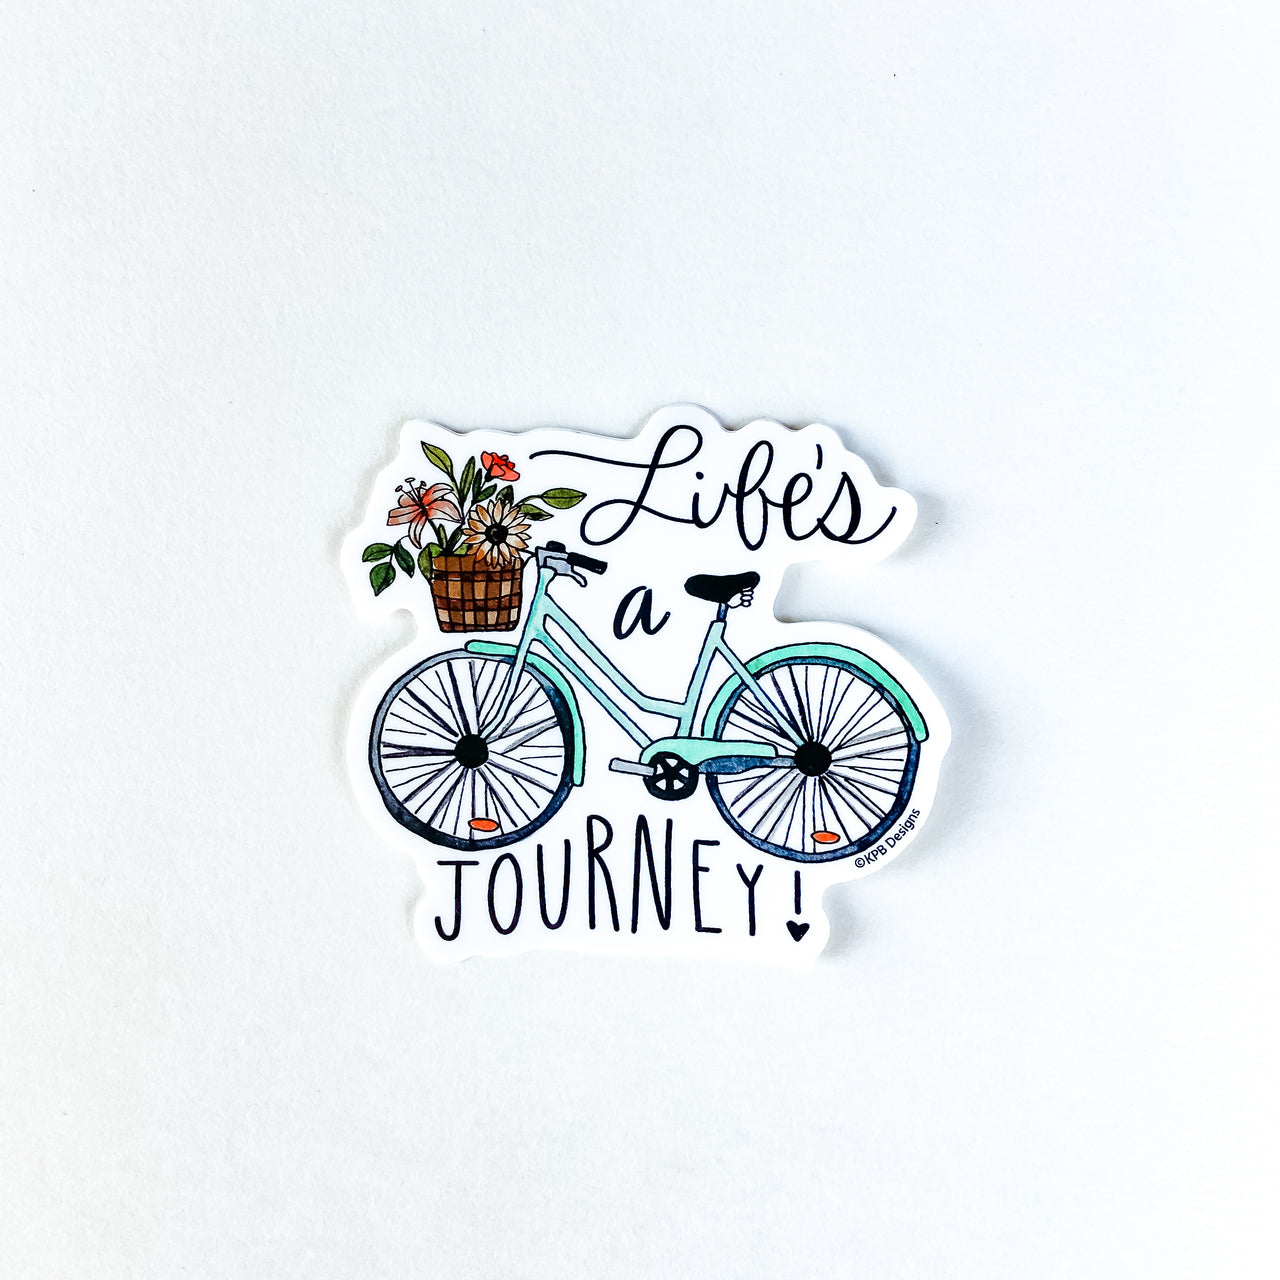 Life's a Journey